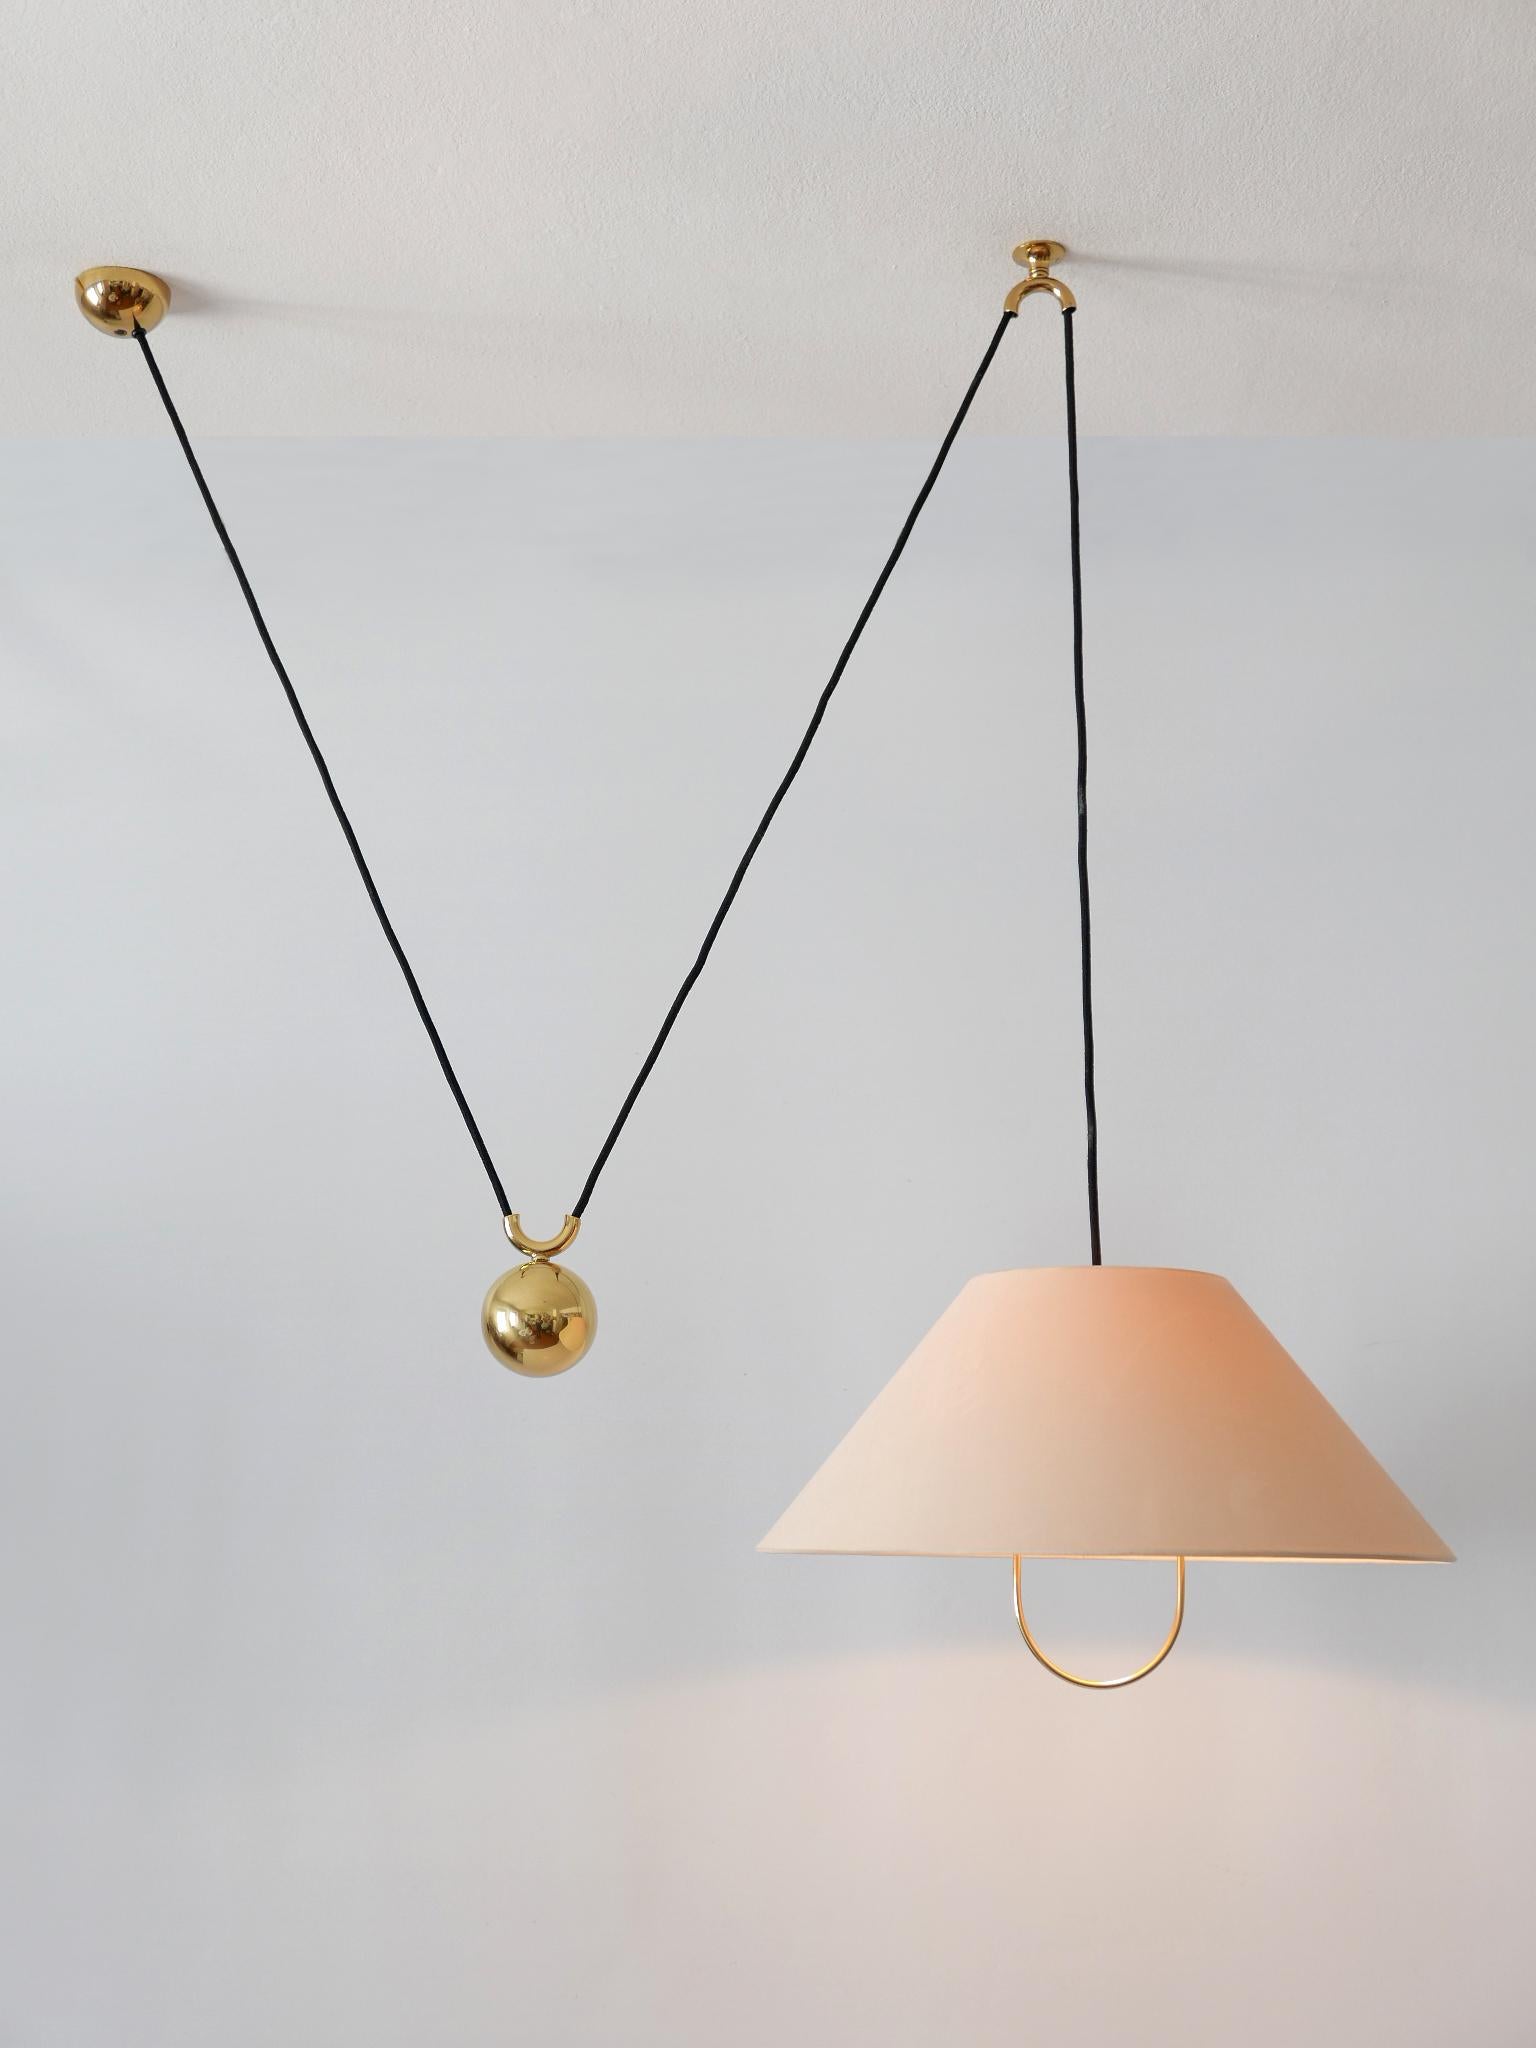 Extremely rare and early counterweight pendant lamp or hanging light. Designed and manufactured by Florian Schulz, Germany, 1960s.

Executed in brass and fabric, the lamp comes with 1 x E27 / E26 Edison screw fit bulb holder, is wired and in